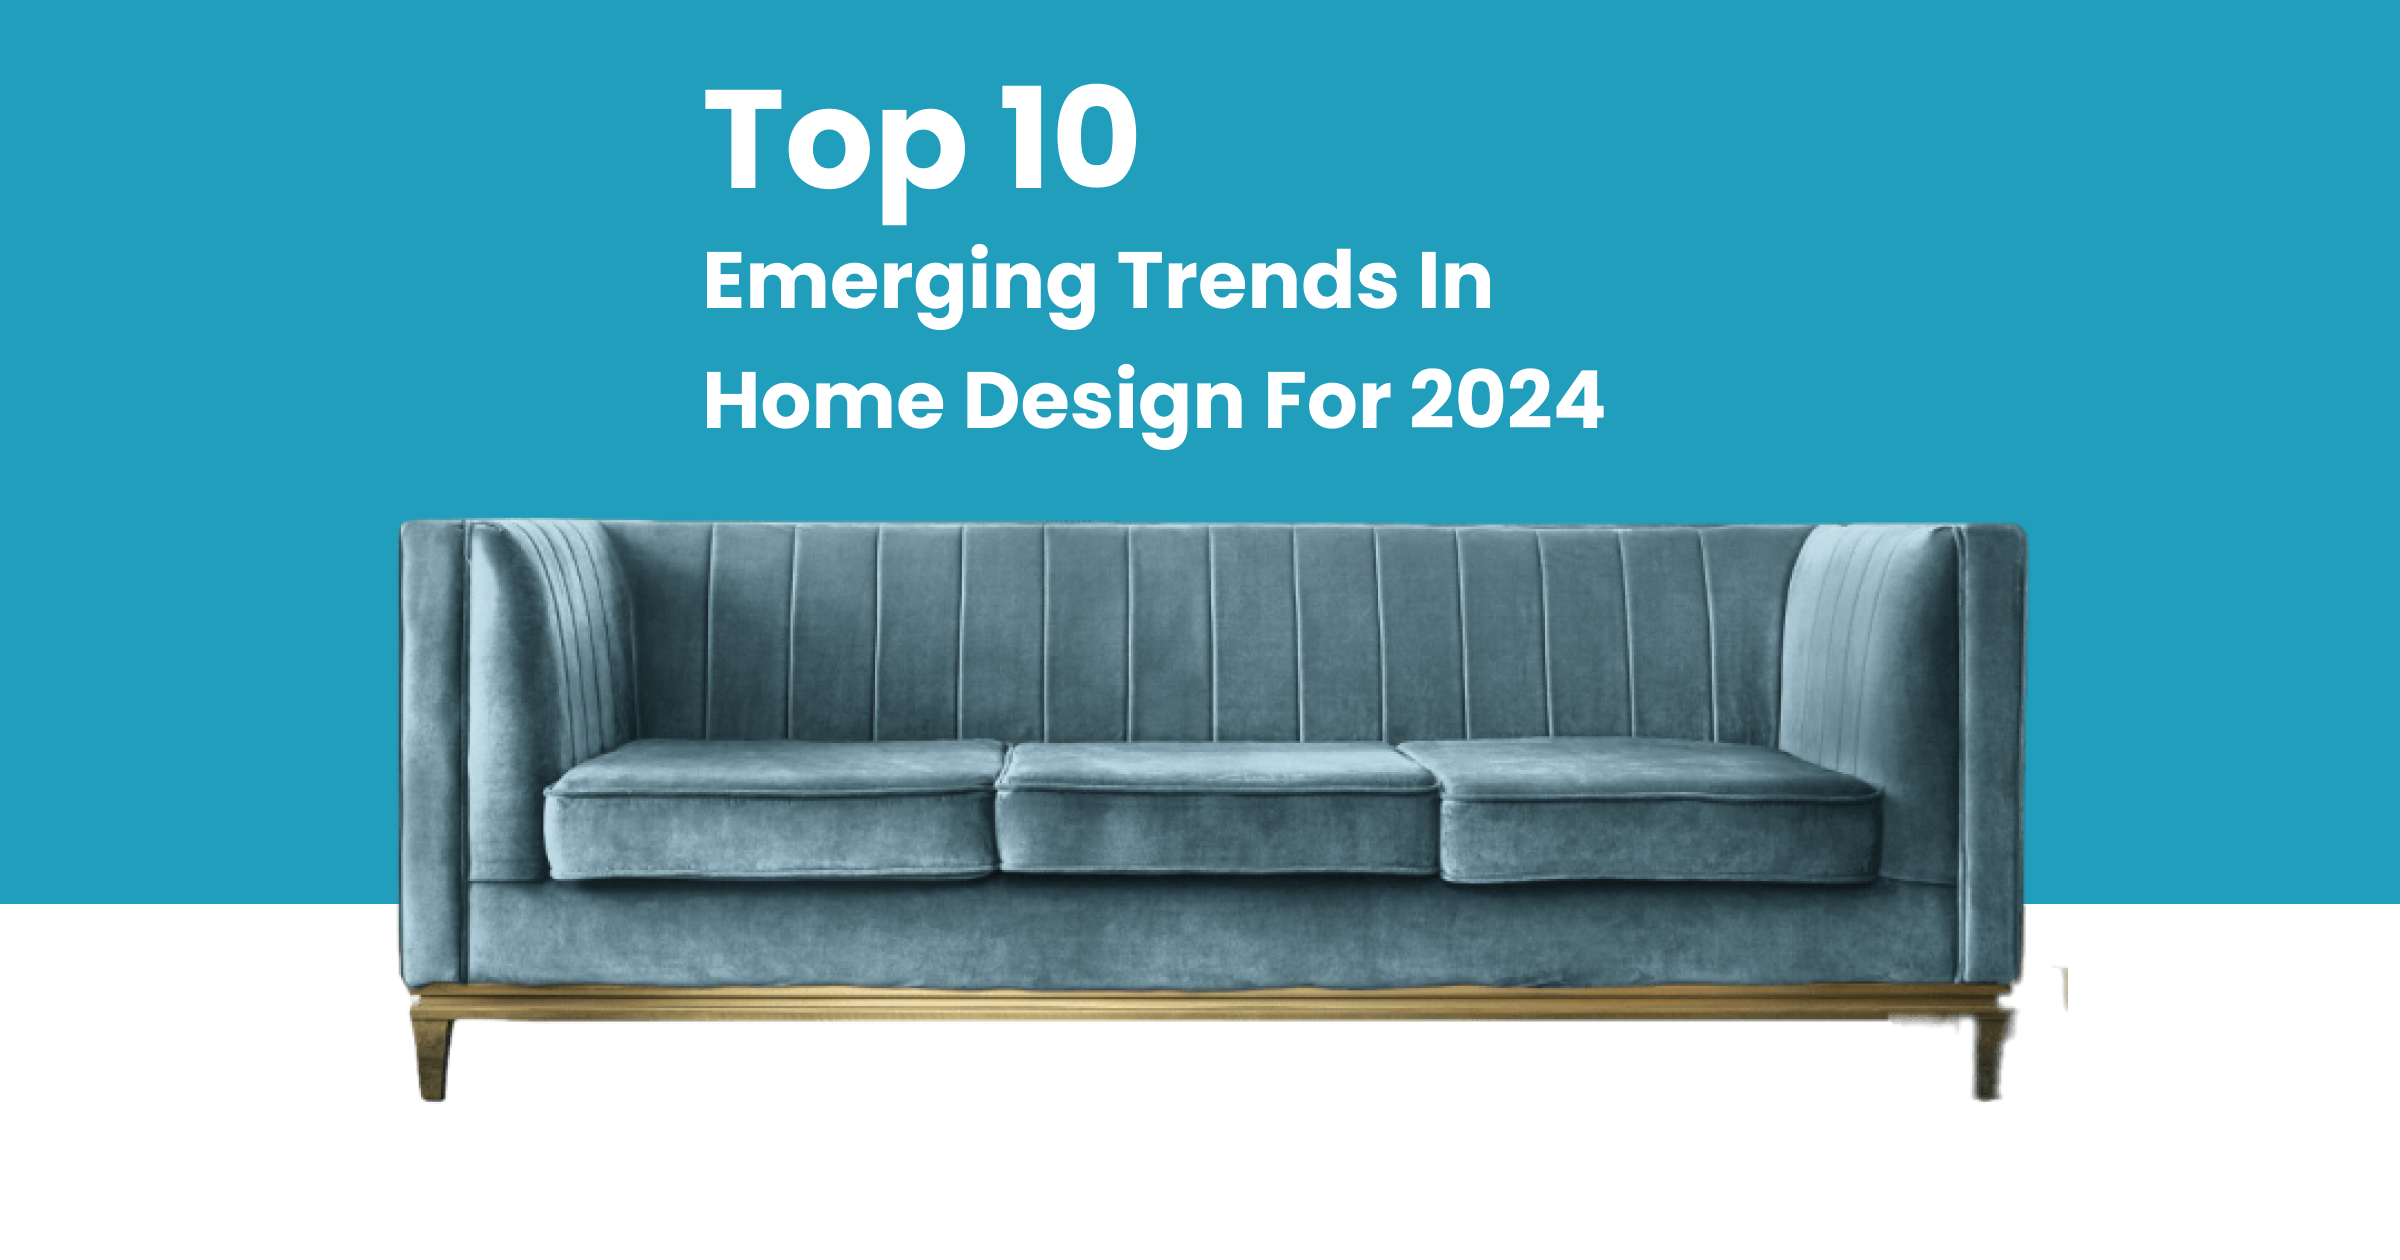 Top 10 Emerging Trends In Home Design For 2024